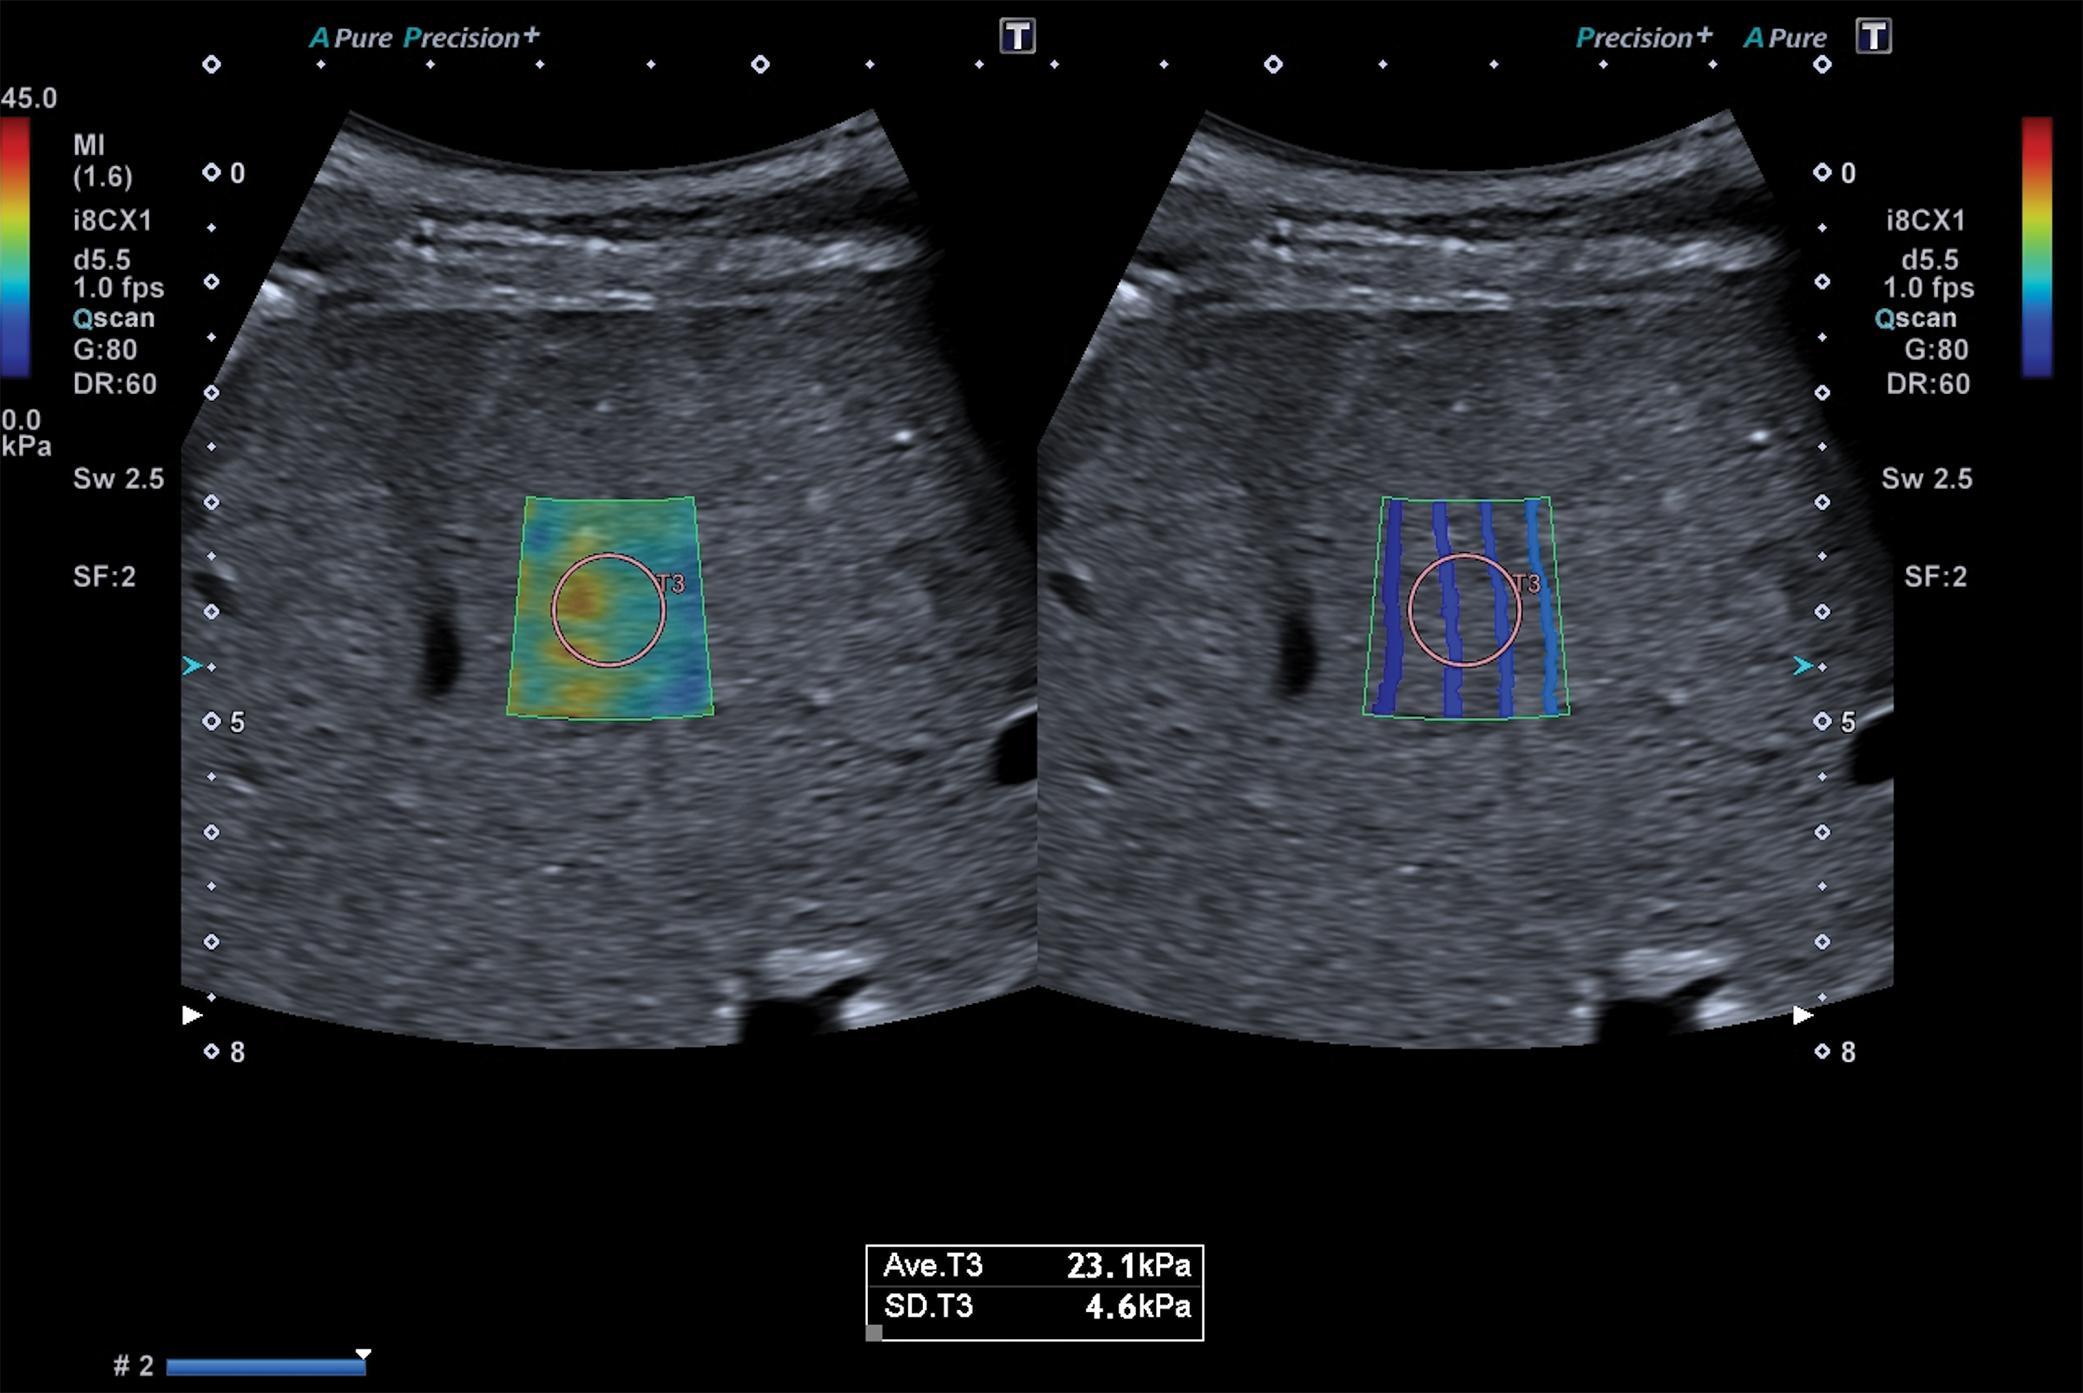 Fig. 7.2, Treatment-naïve 64-year-old man with chronic hepatitis C. The patient had had an episode of liver decompensation a month before the examination. The stiffness value obtained with a two-dimensional shear wave elastography technique (Aplio i800 ultrasound system, Canon Medical Systems) is 23.1 kPa, indicating a high likelihood of clinically significant portal hypertension. The measurement was taken following the quality criterion given by the manufacturer (i.e., the lines were parallel and equally spaced in the propagation map [right]) .